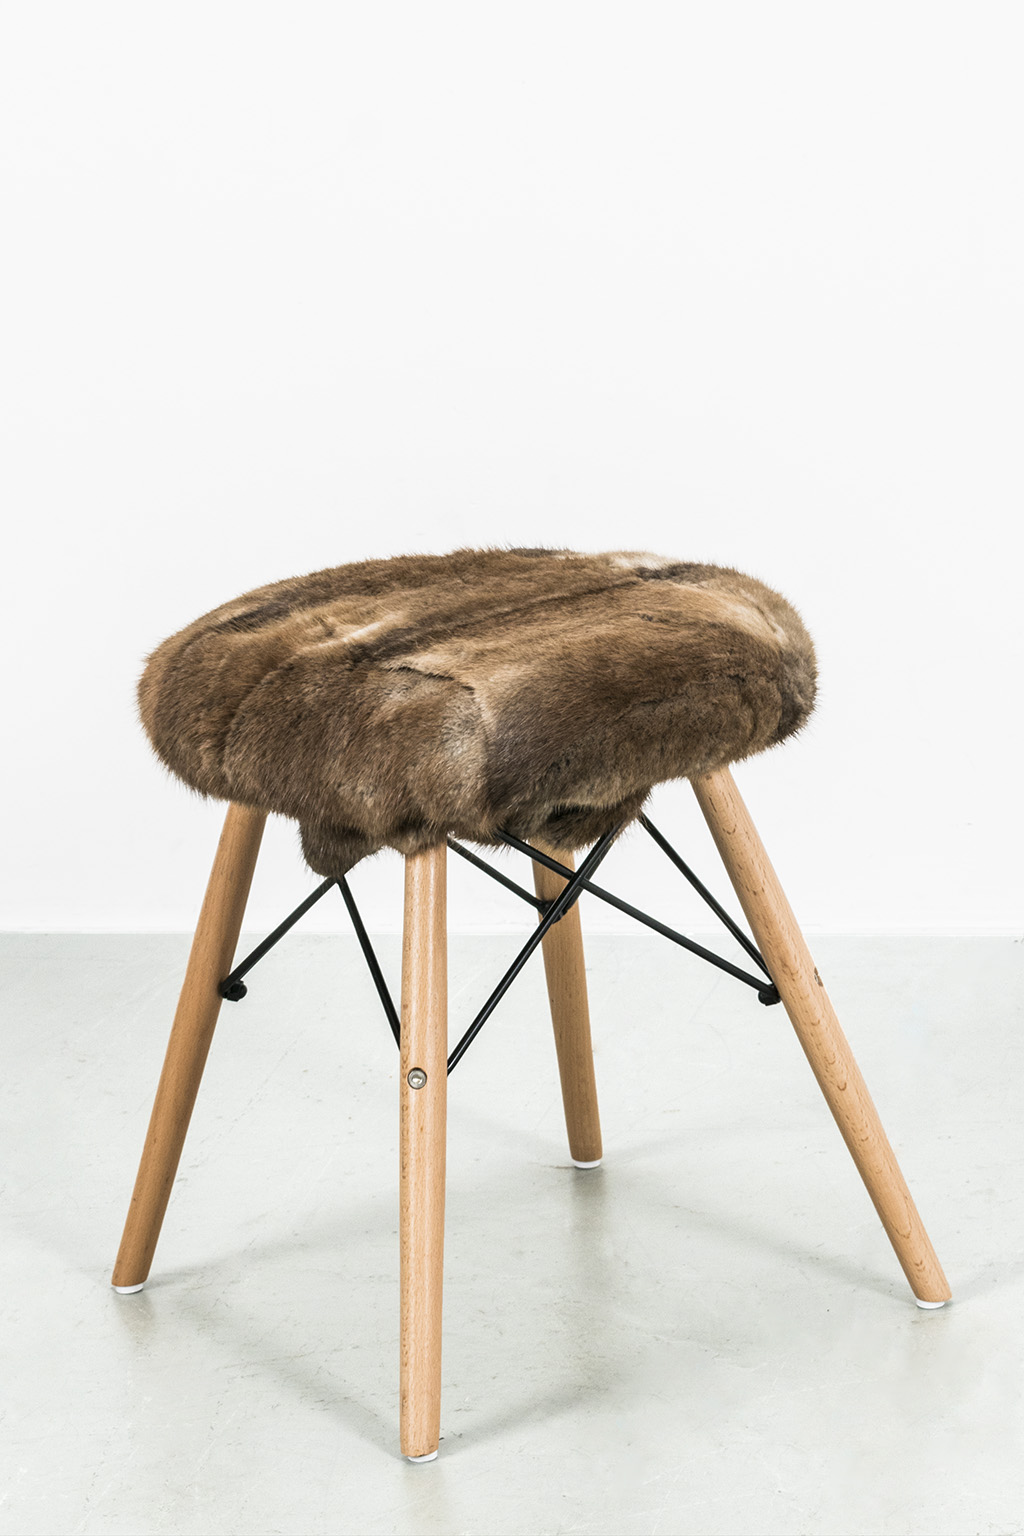 Upcycled stool with fur